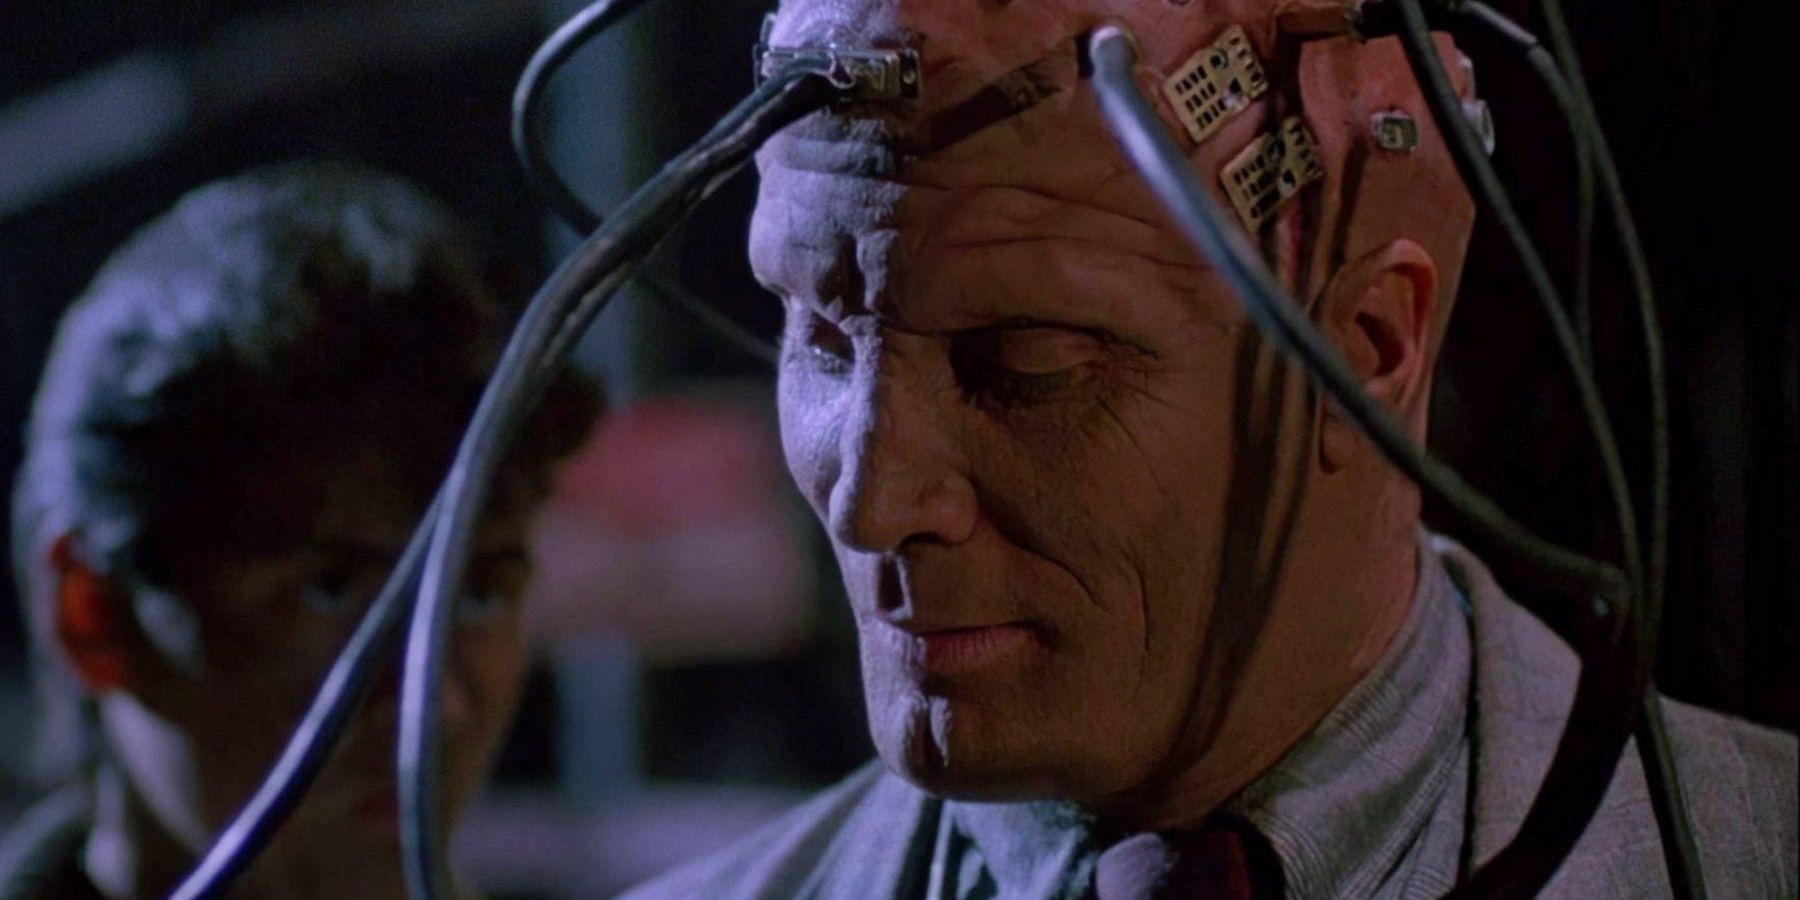 Vernon Wells with wires coming out of his head in Circuitry Man